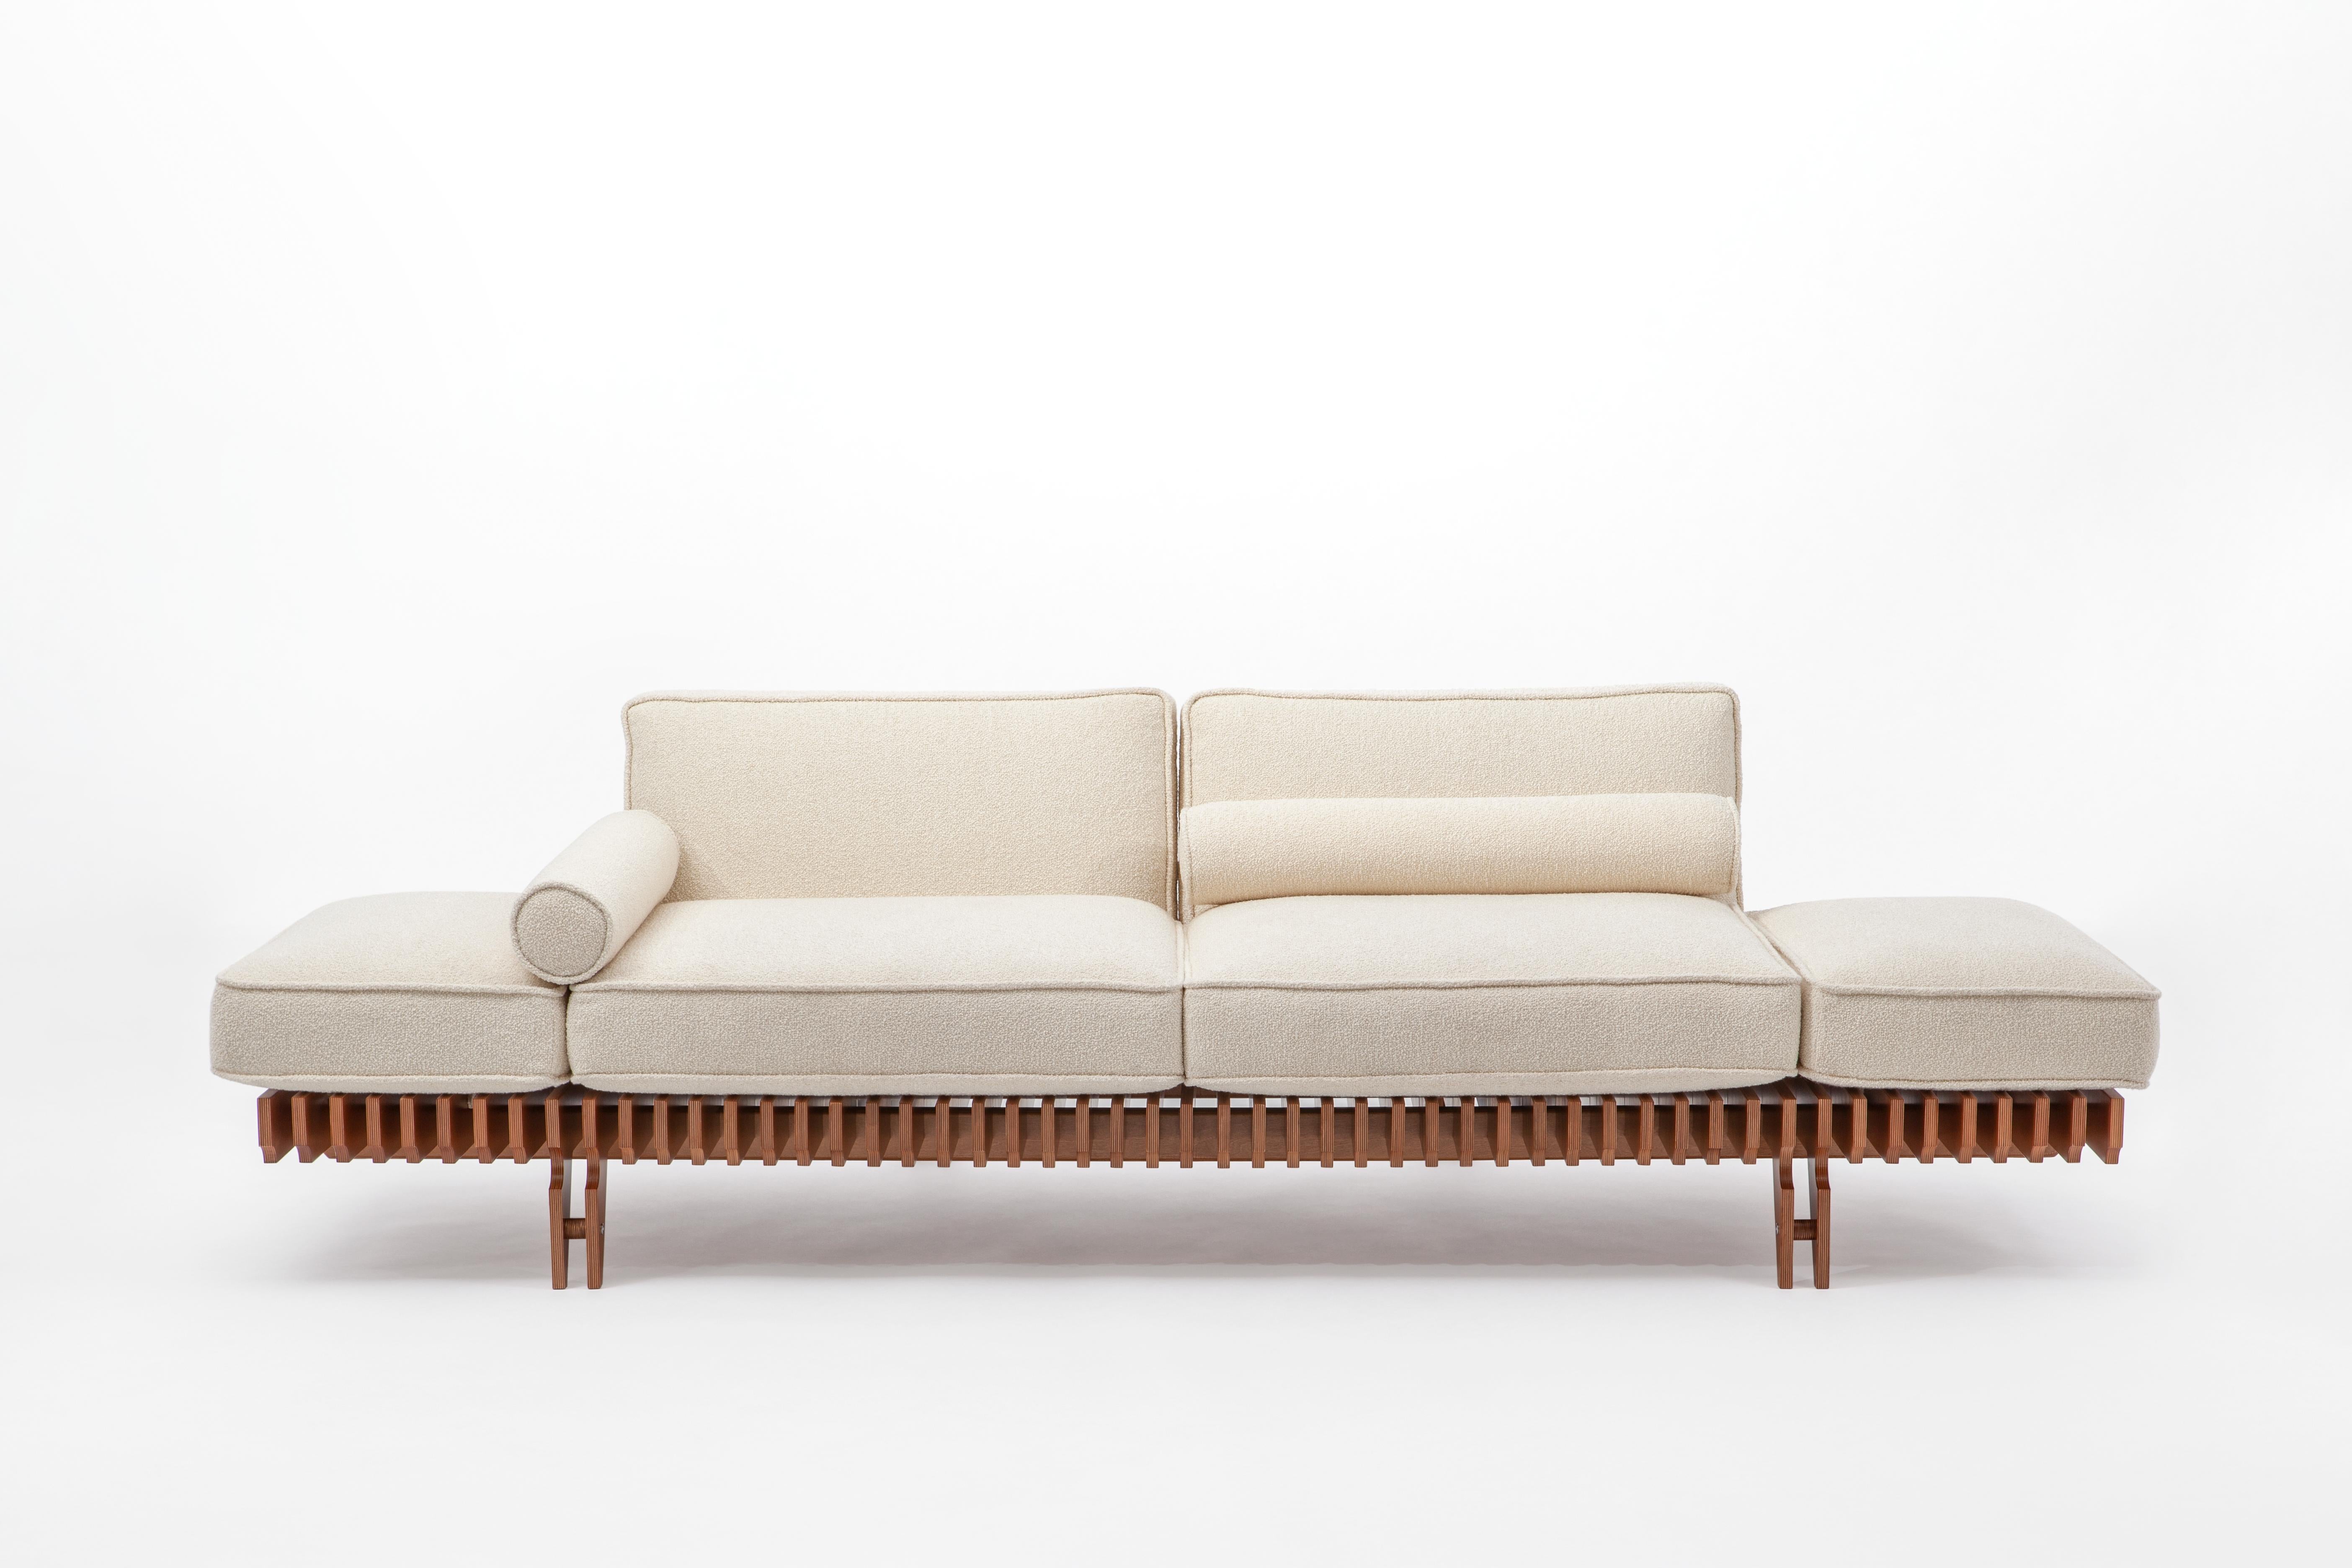 Muir Sofa by SEM
Dimensions: D265 x W96 x H77 cm
Material:Mahogany stained birch plywood structure, Padding in feather with upholstery in Torrilana Fabric
Costumized leather and fabric available on request.

The idea for the 'MUIR' sofa was born